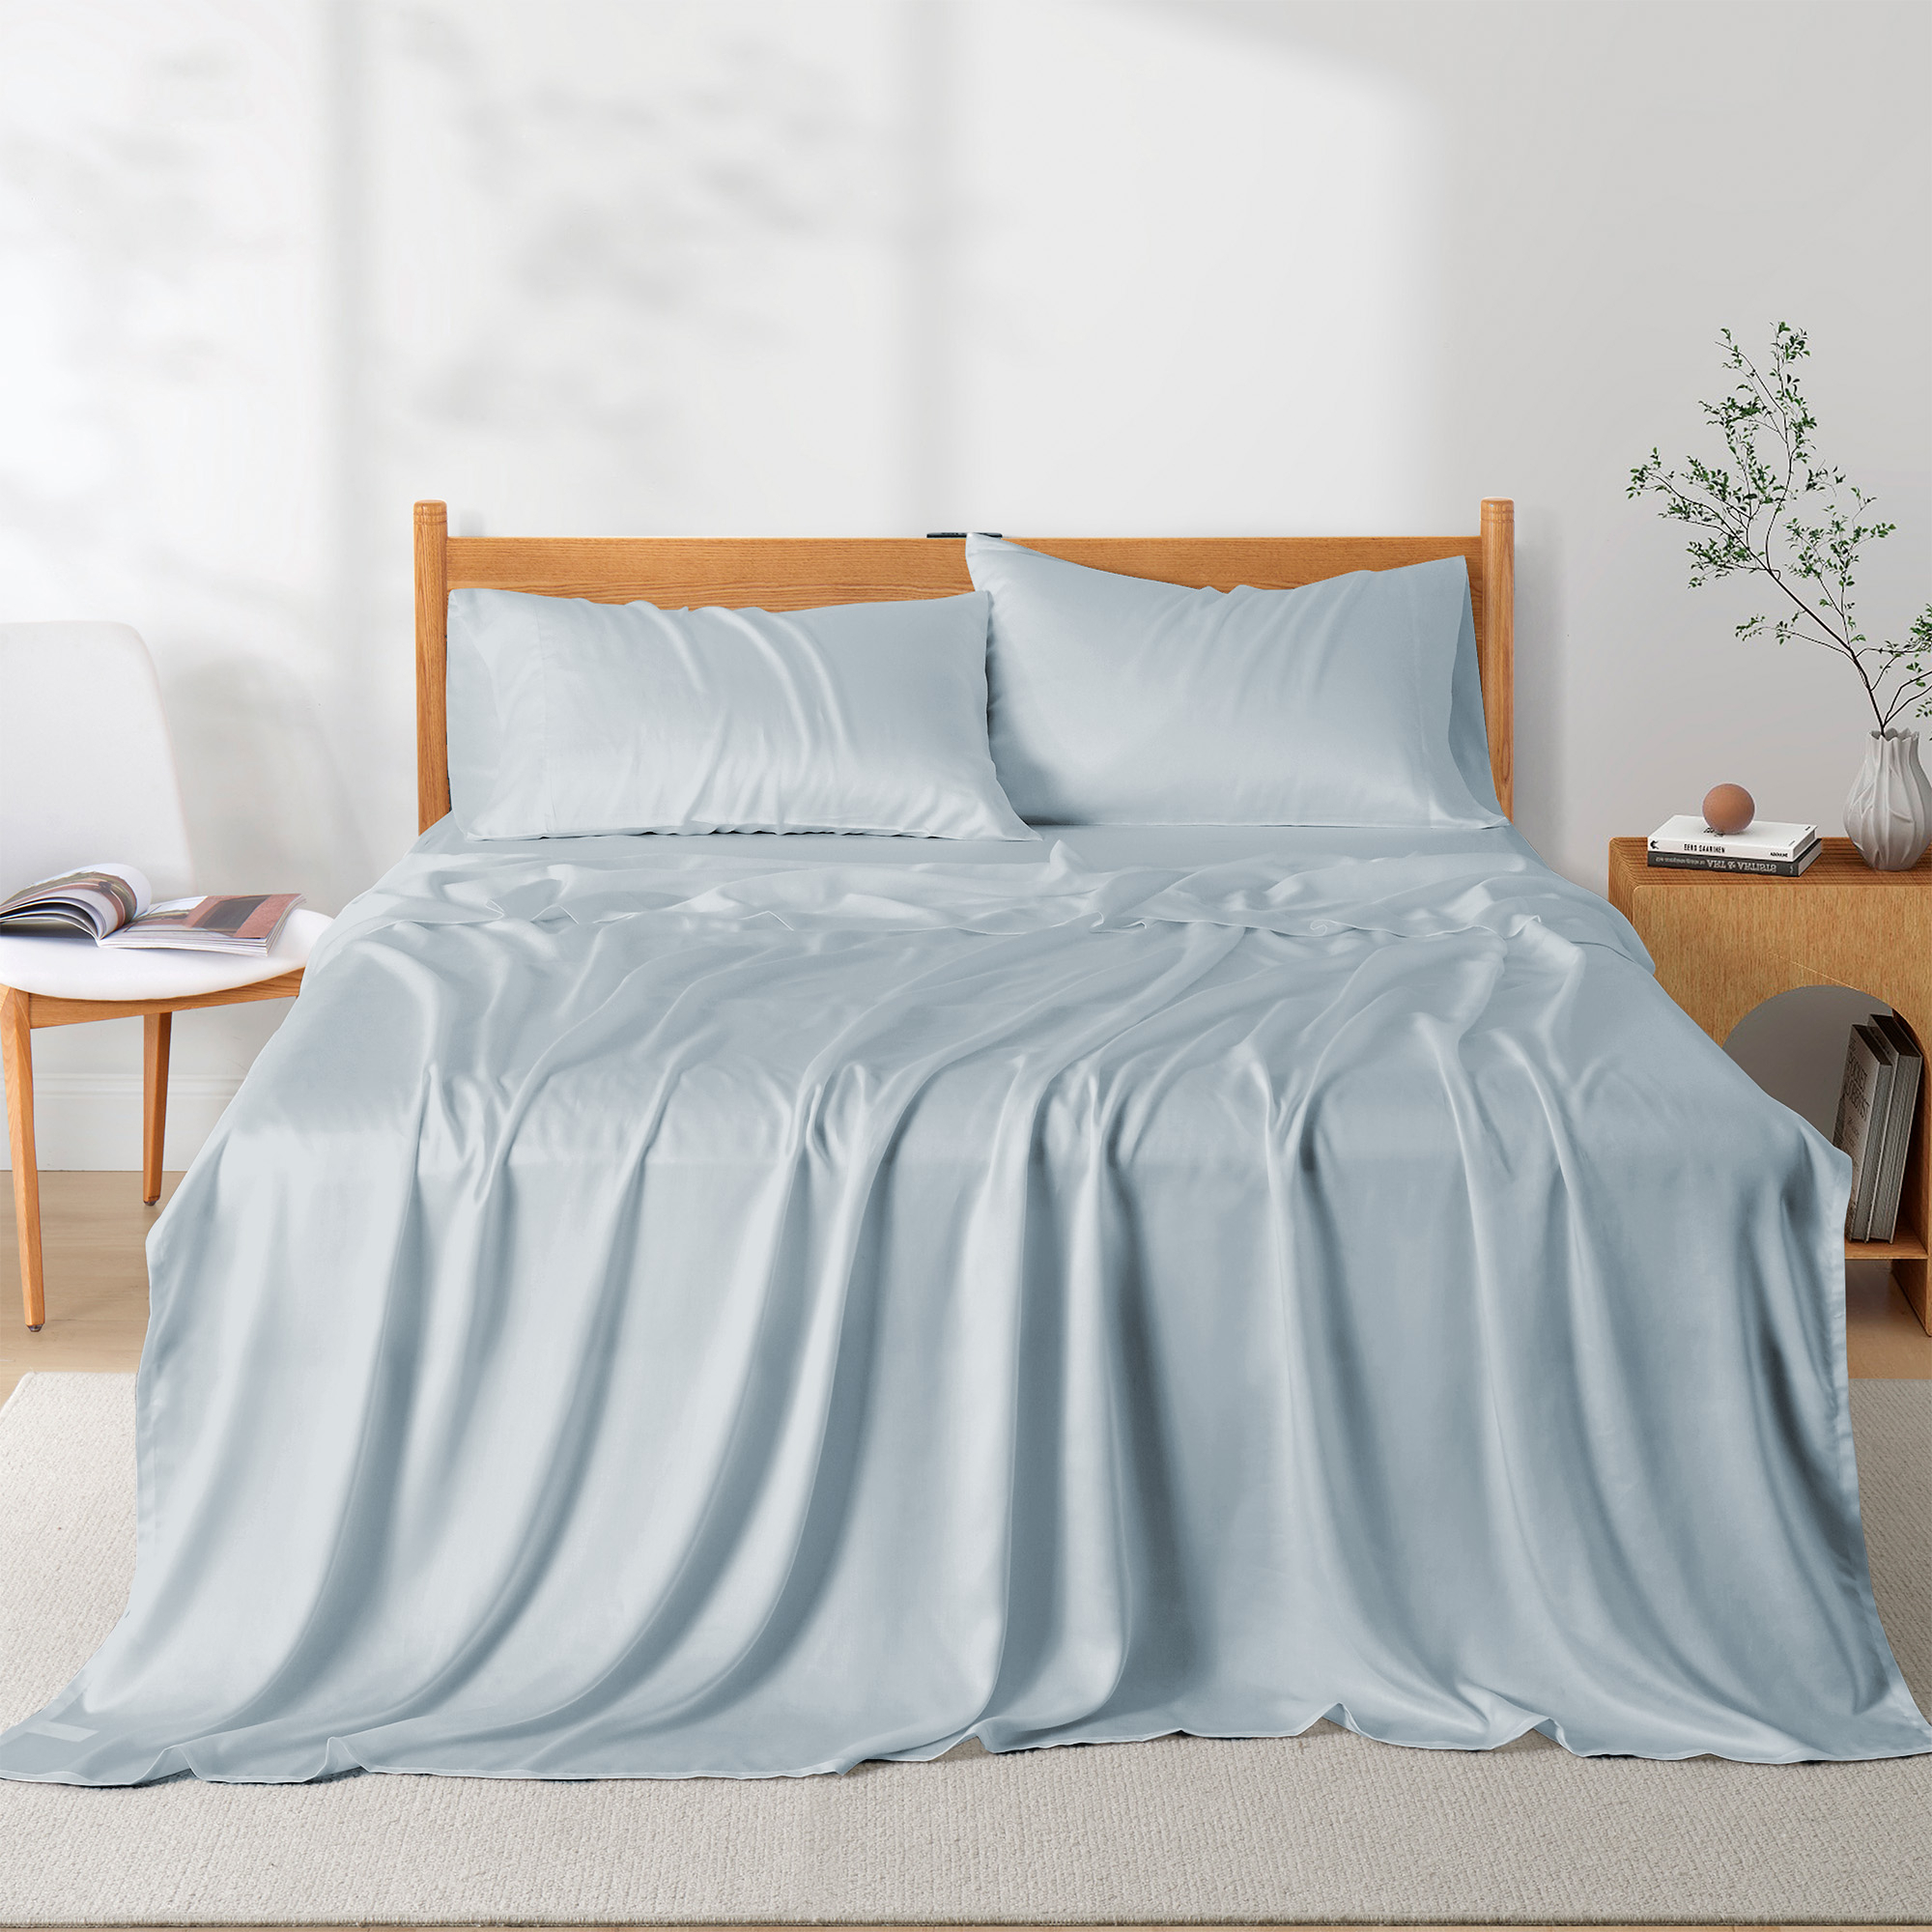 Cooling Sheets For Hot Sleepers, TENCELâ¢ Lyocell Sheets, Deep Pocket, Hotel Sheets - Full Size